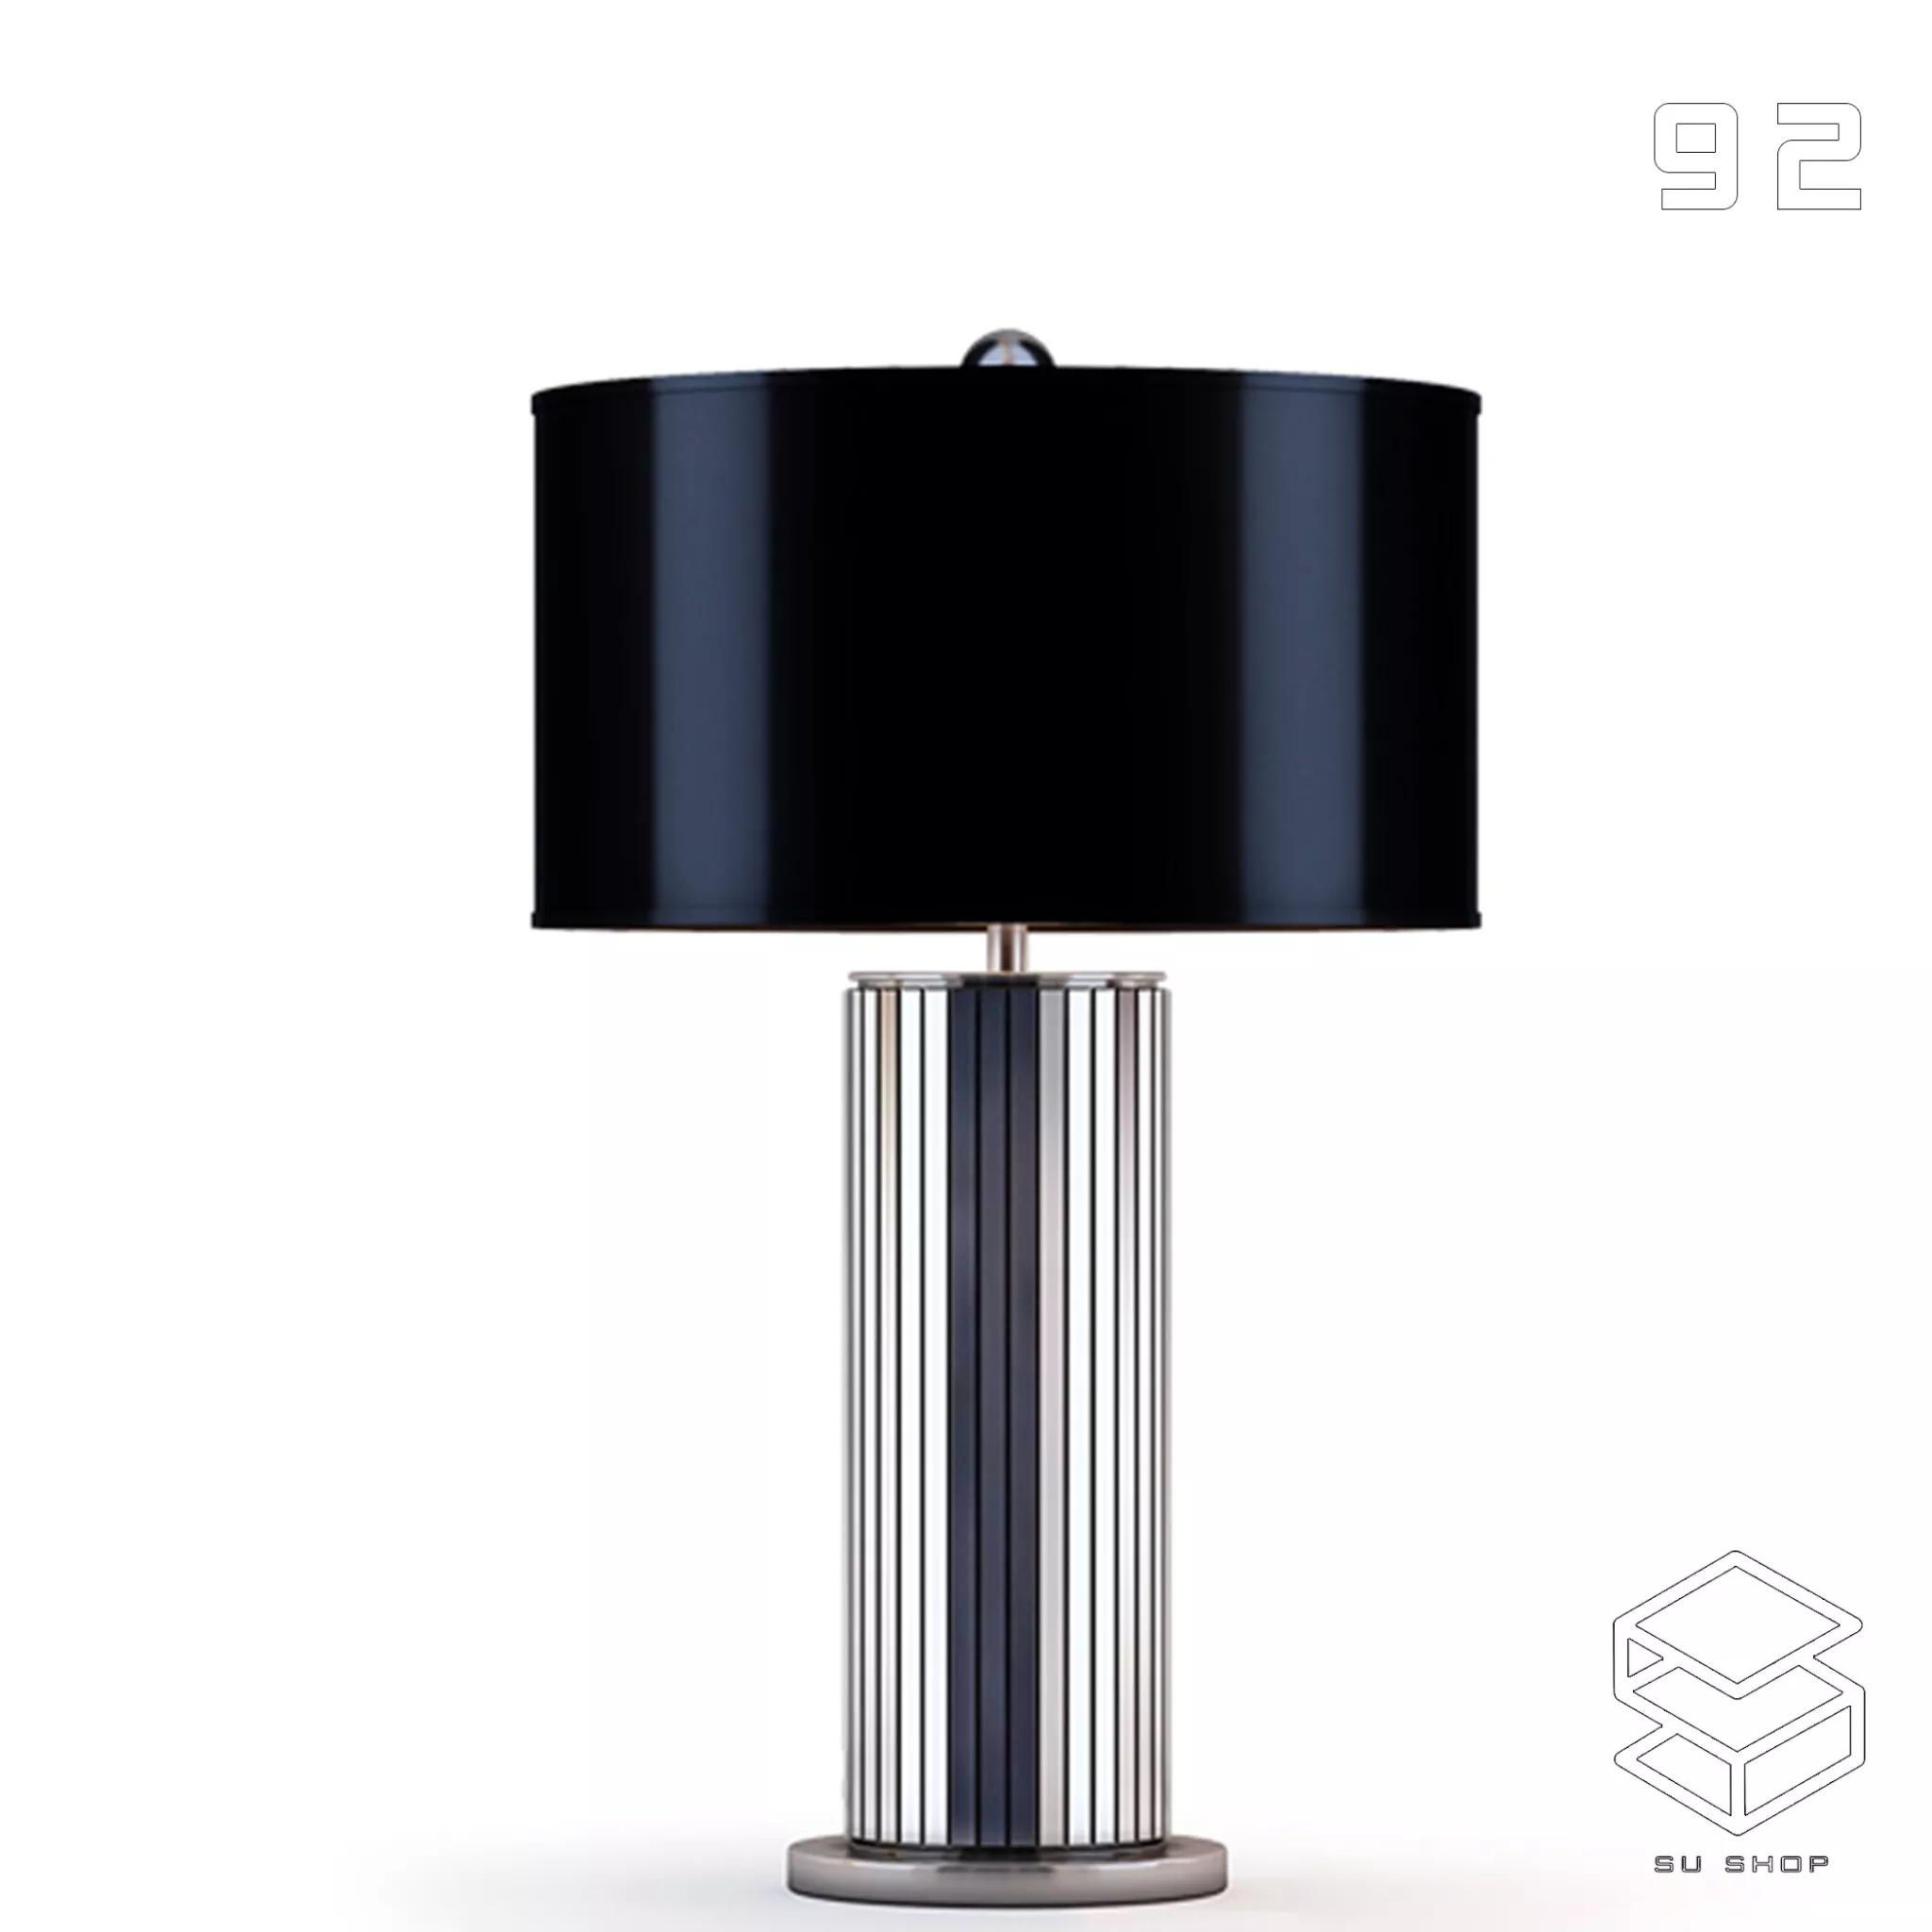 MODERN TABLE LAMP - SKETCHUP 3D MODEL - VRAY OR ENSCAPE - ID14891